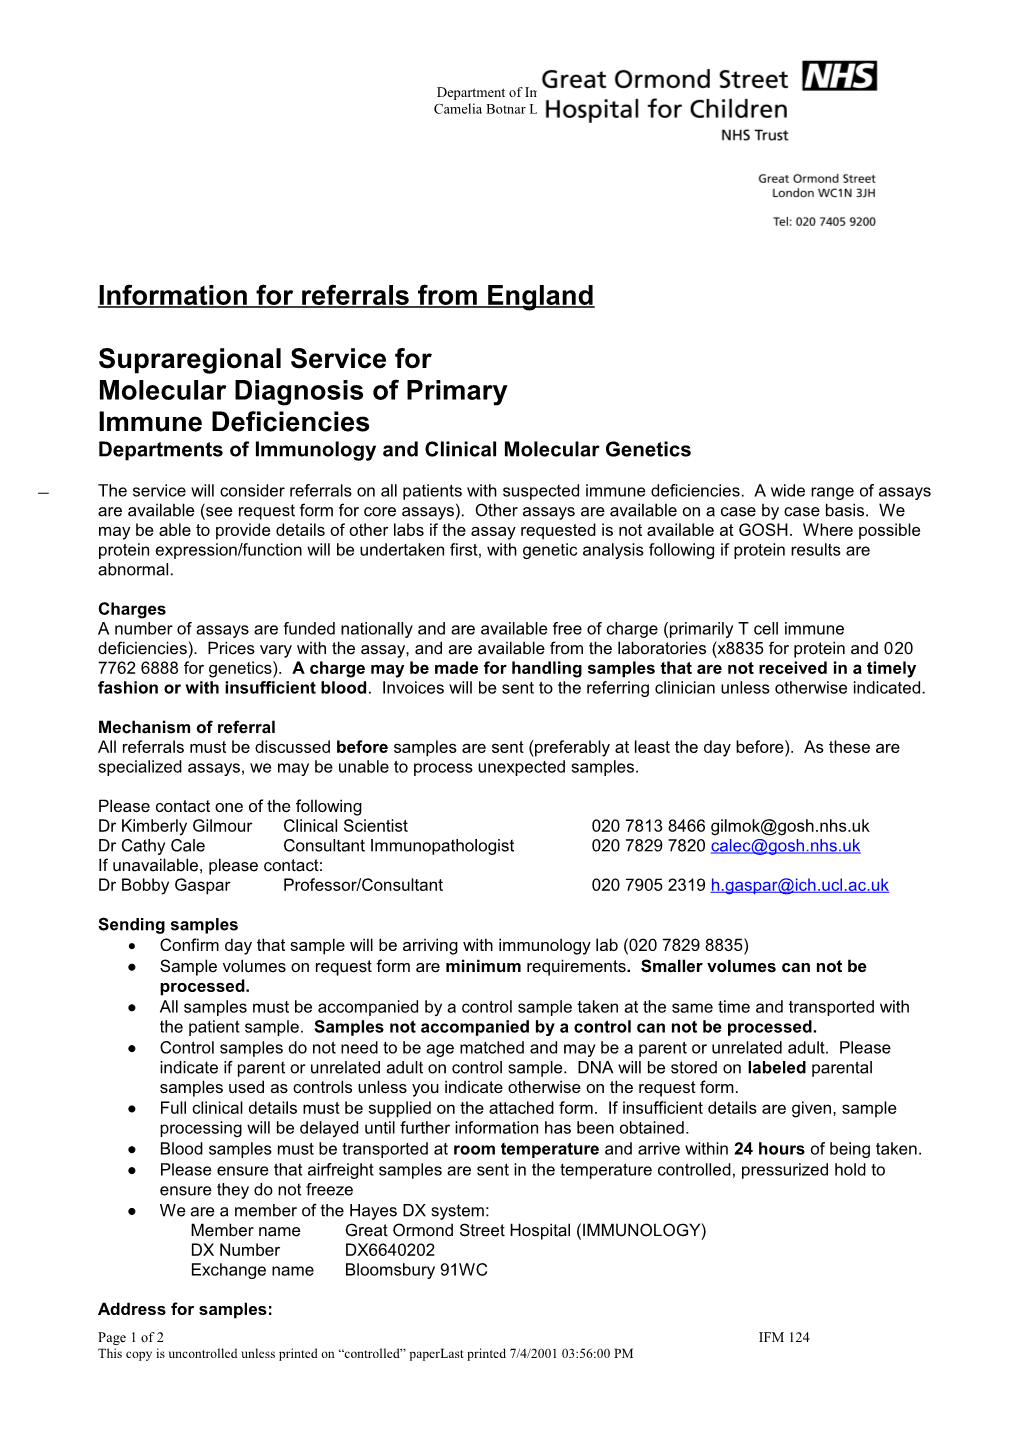 Information for Referrals from England